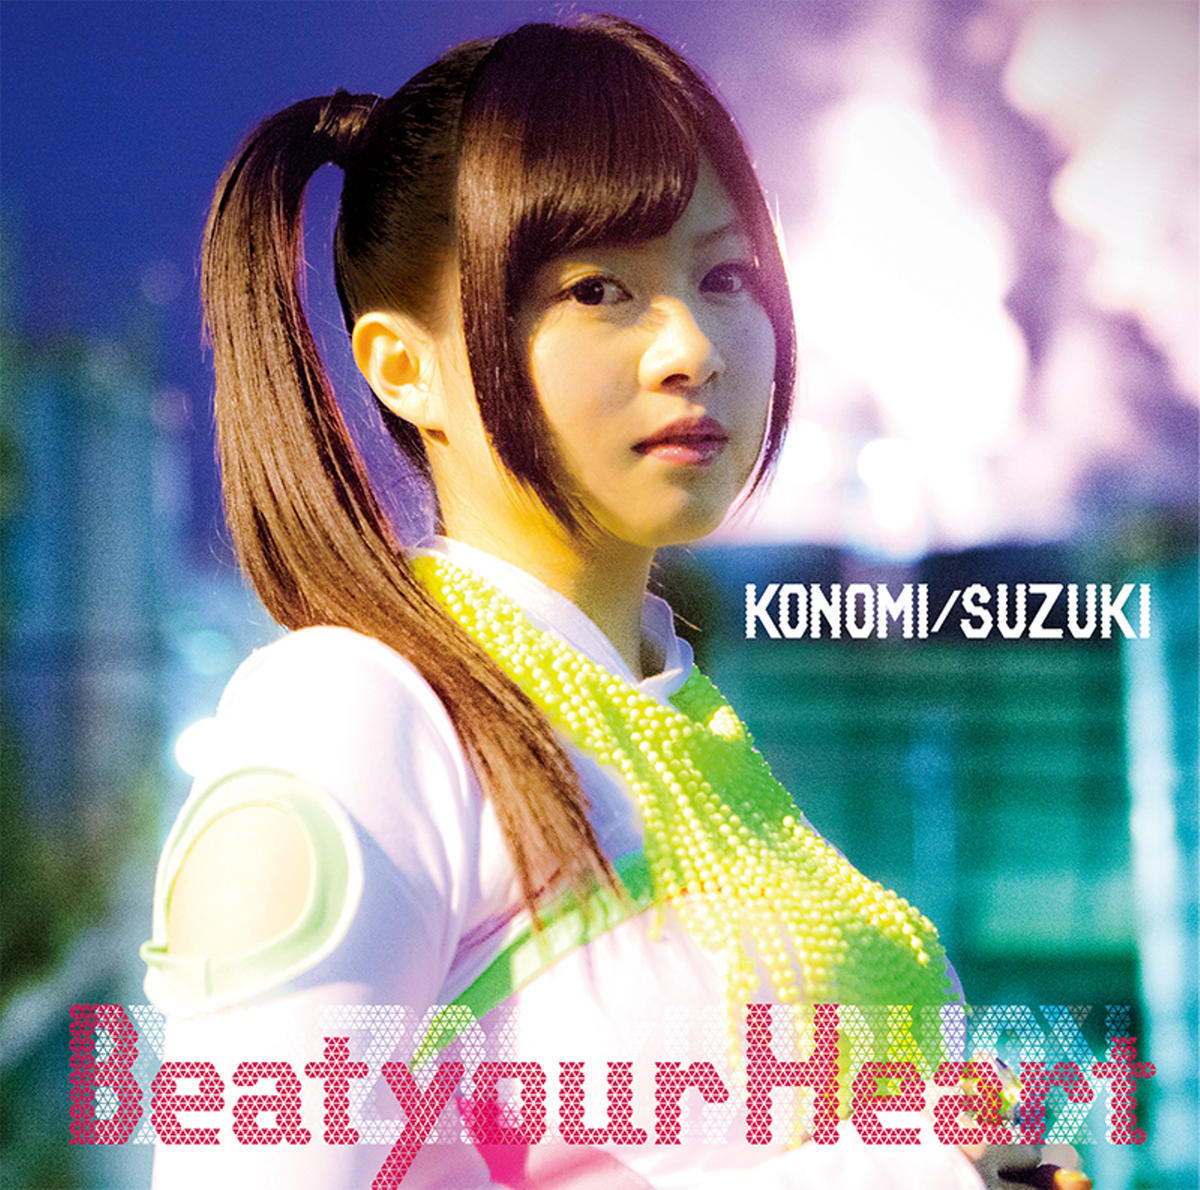 Beat your Heart